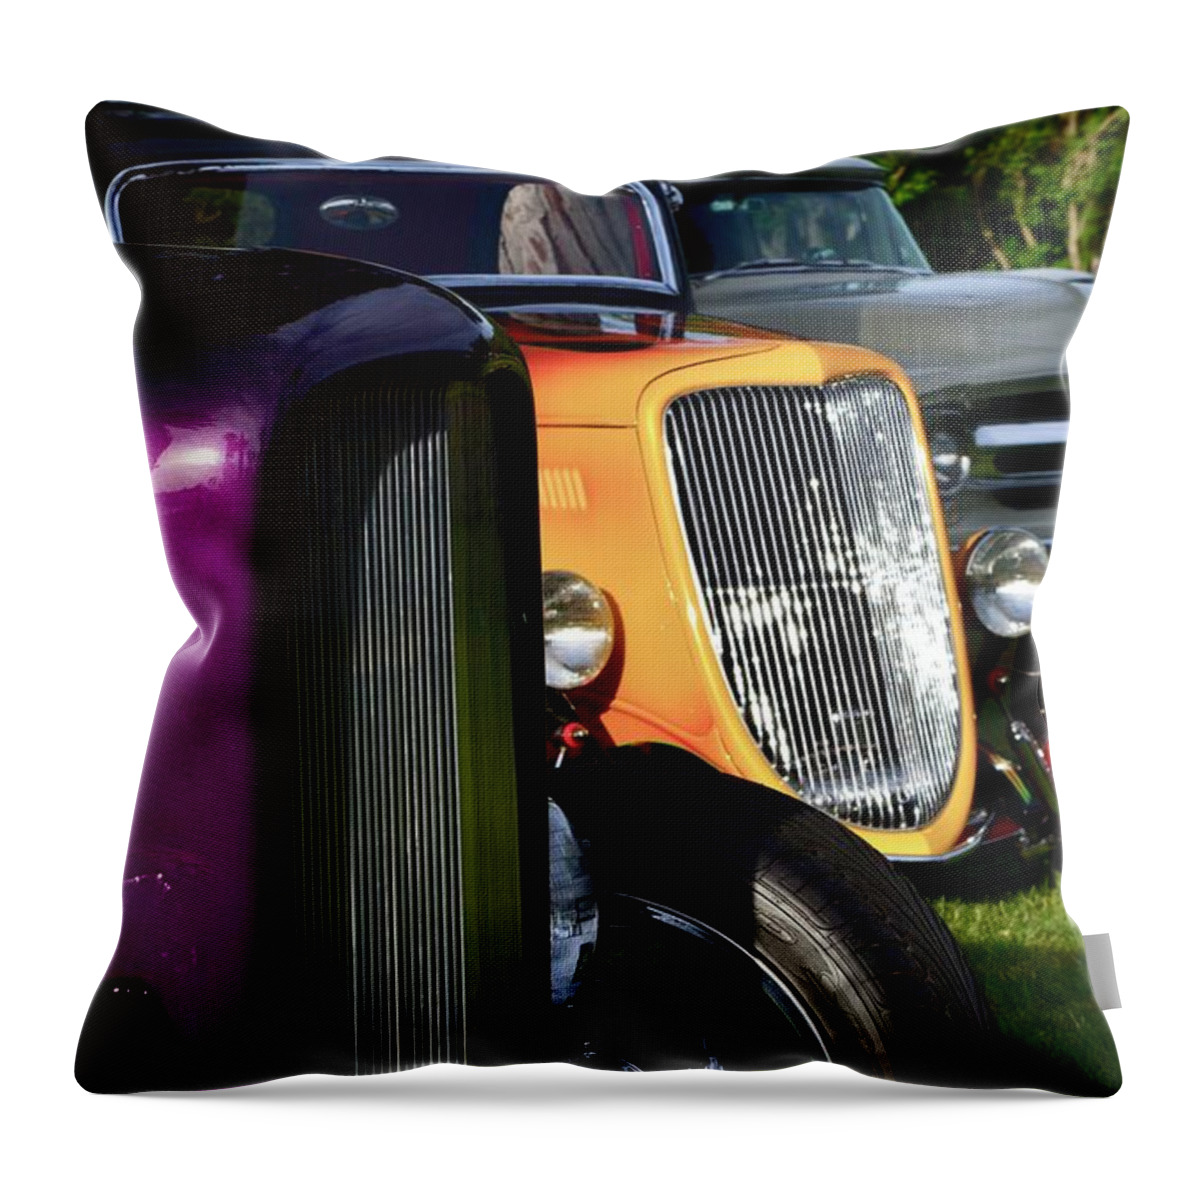  Throw Pillow featuring the photograph Hotrods #1 by Dean Ferreira